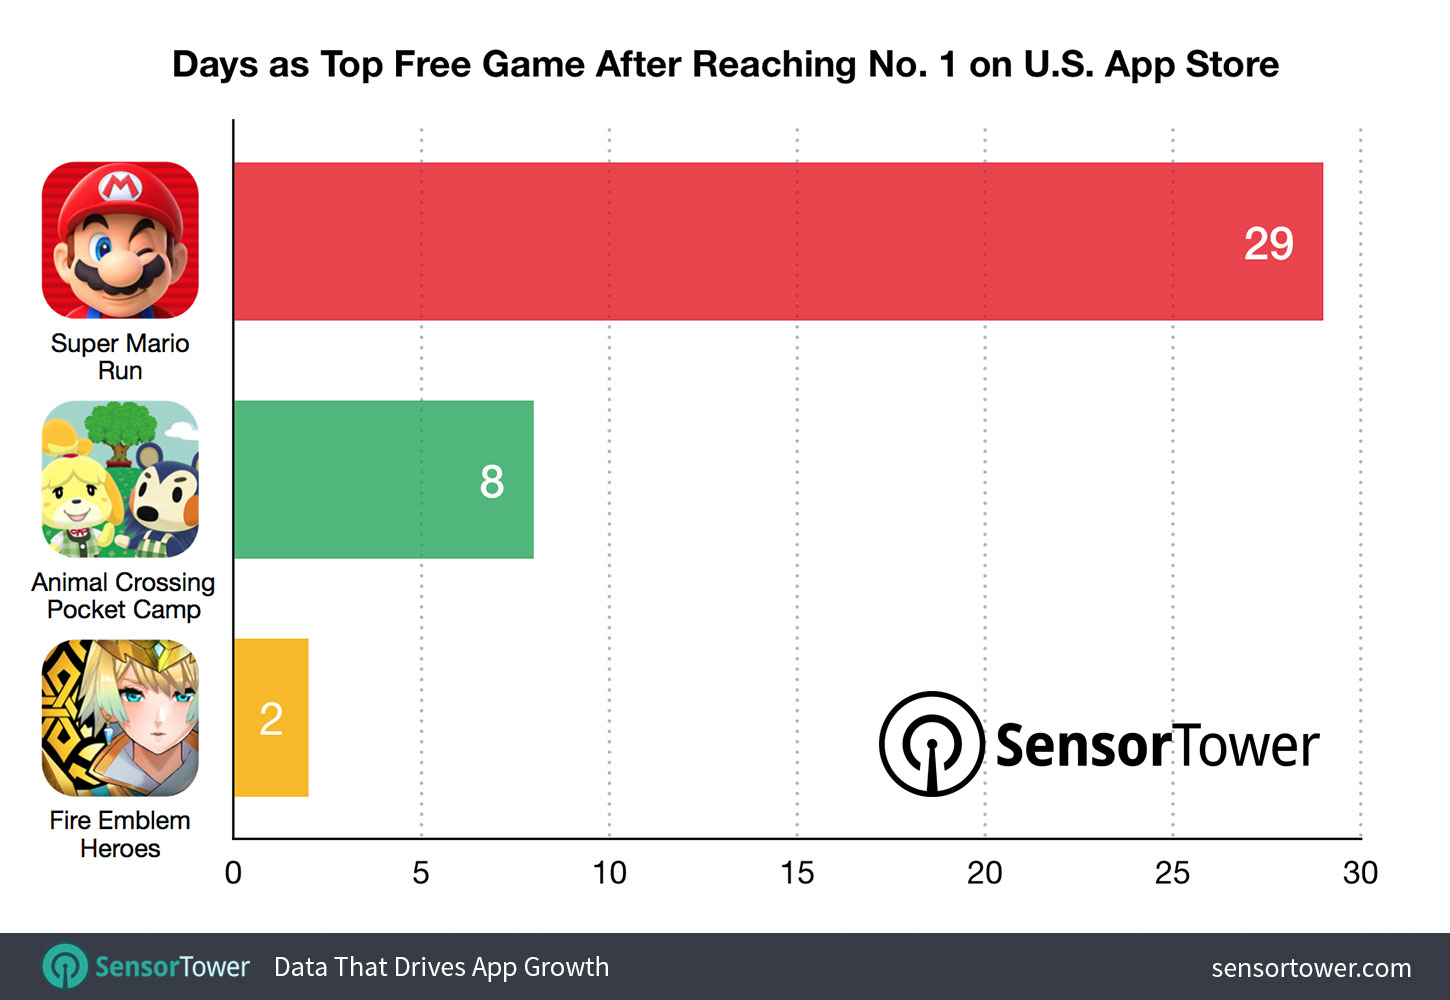 Time spent at No. 1 in the U.S. App Store Games category by Animal Crossing Pocket Camp, Super Mario Run, and Fire Emblem Heroes